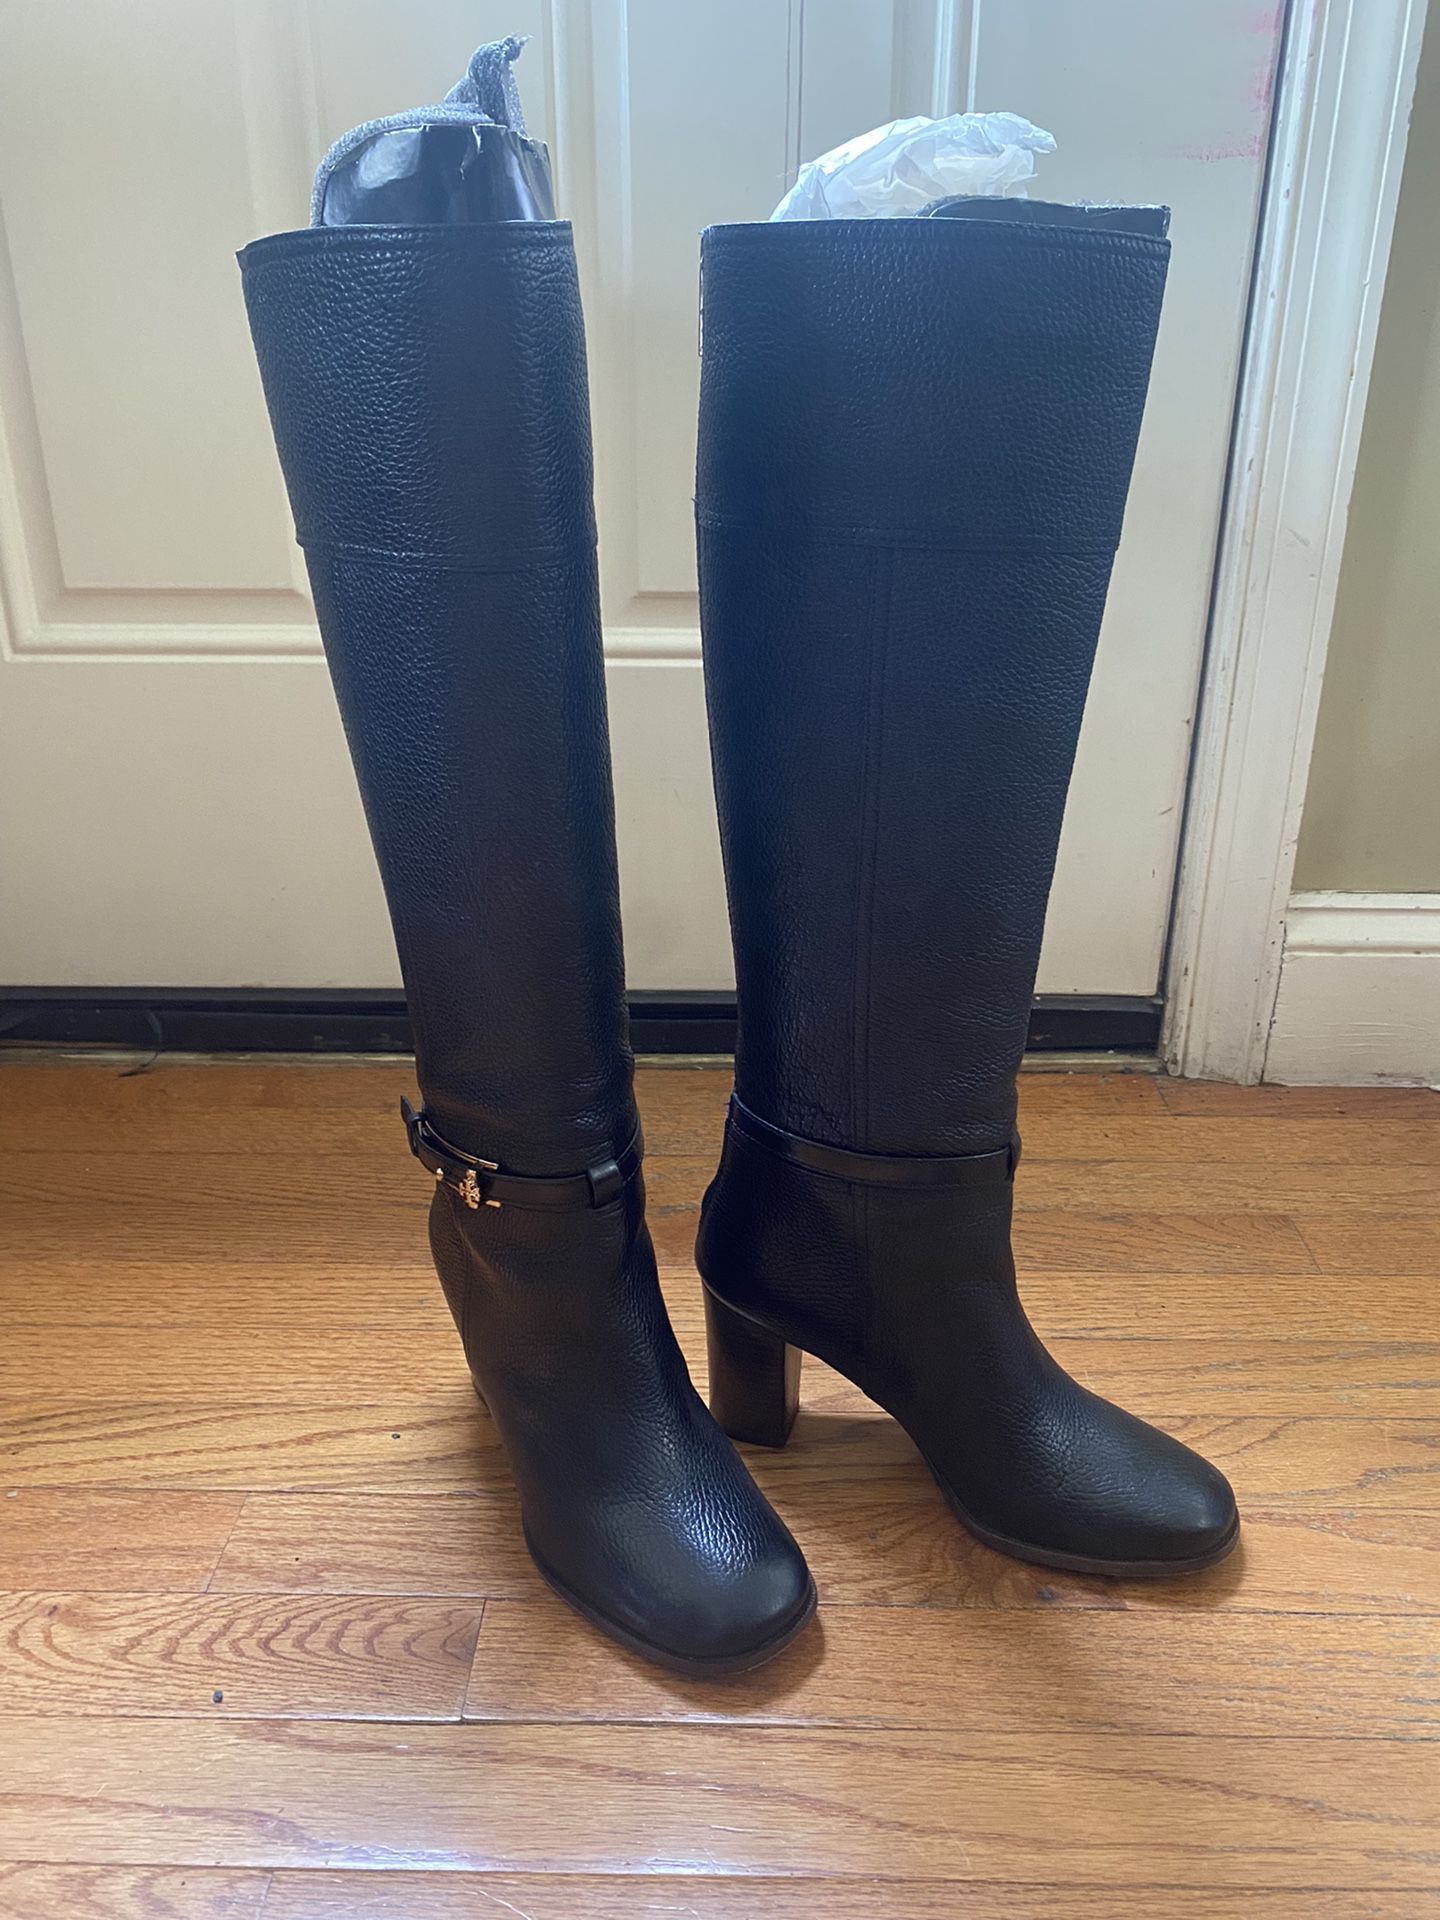 Tory Burch Jenna Knee High Pebble Leather Boots Size 8